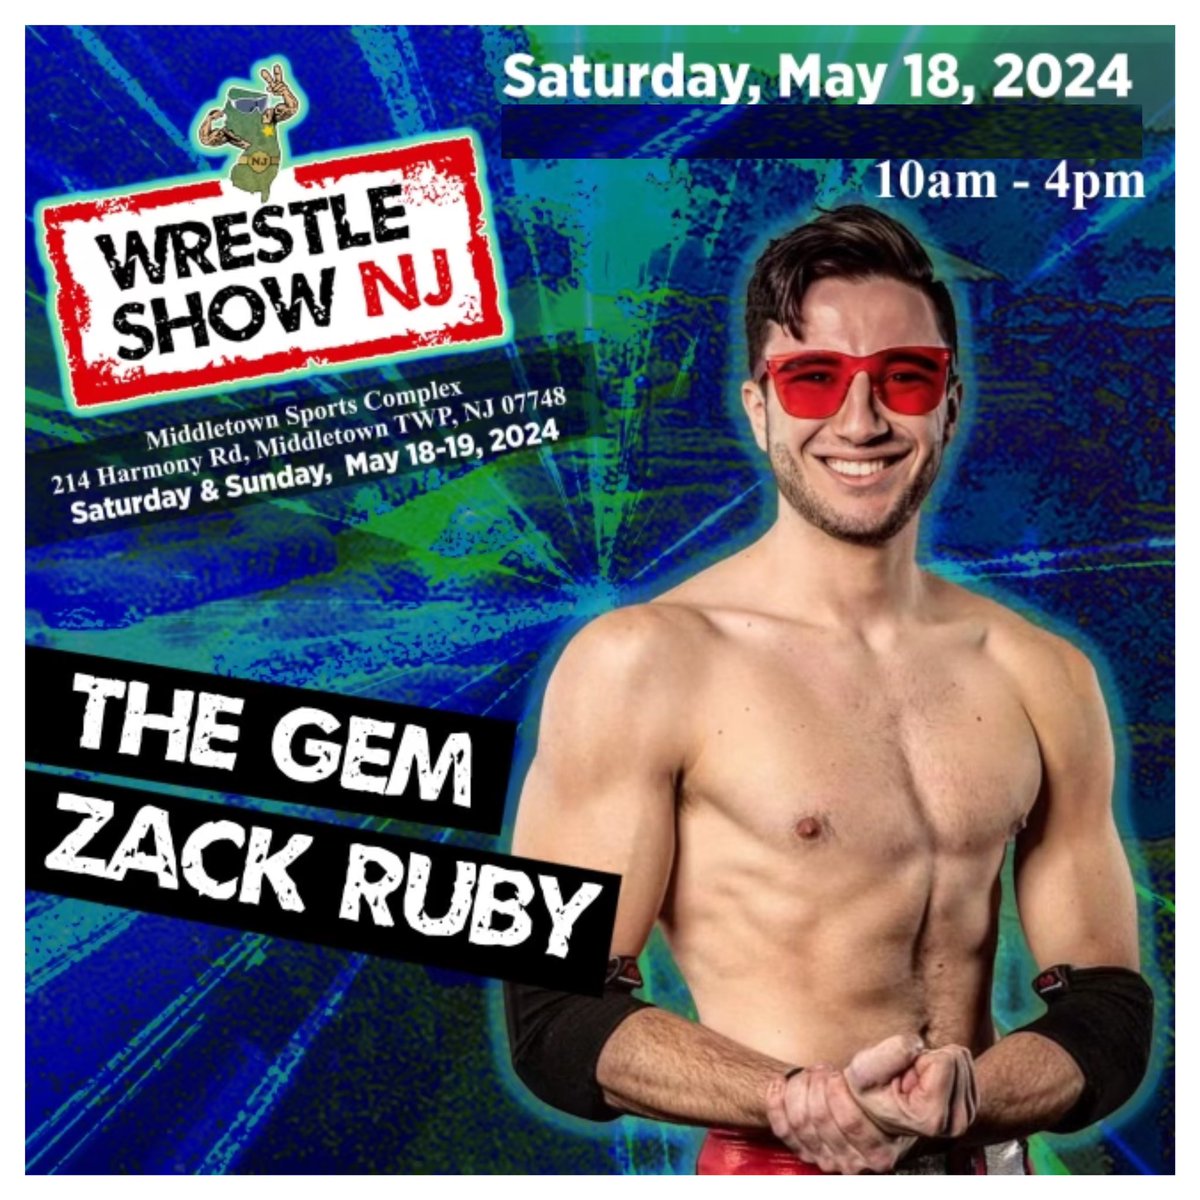 💎Come meet “The GEM” Zack Ruby next SATURDAY, MAY 18, 2024 (10am-4pm) @ The Middletown Sports Complex for Wrestle Show NJ 💎
#njwrestling #wrestleshownj #wrestling #prowrestling #prowrestler #nj #event #signing #meetandgreet #professionalwrestling #aew #wwe #ecw #tna #roh